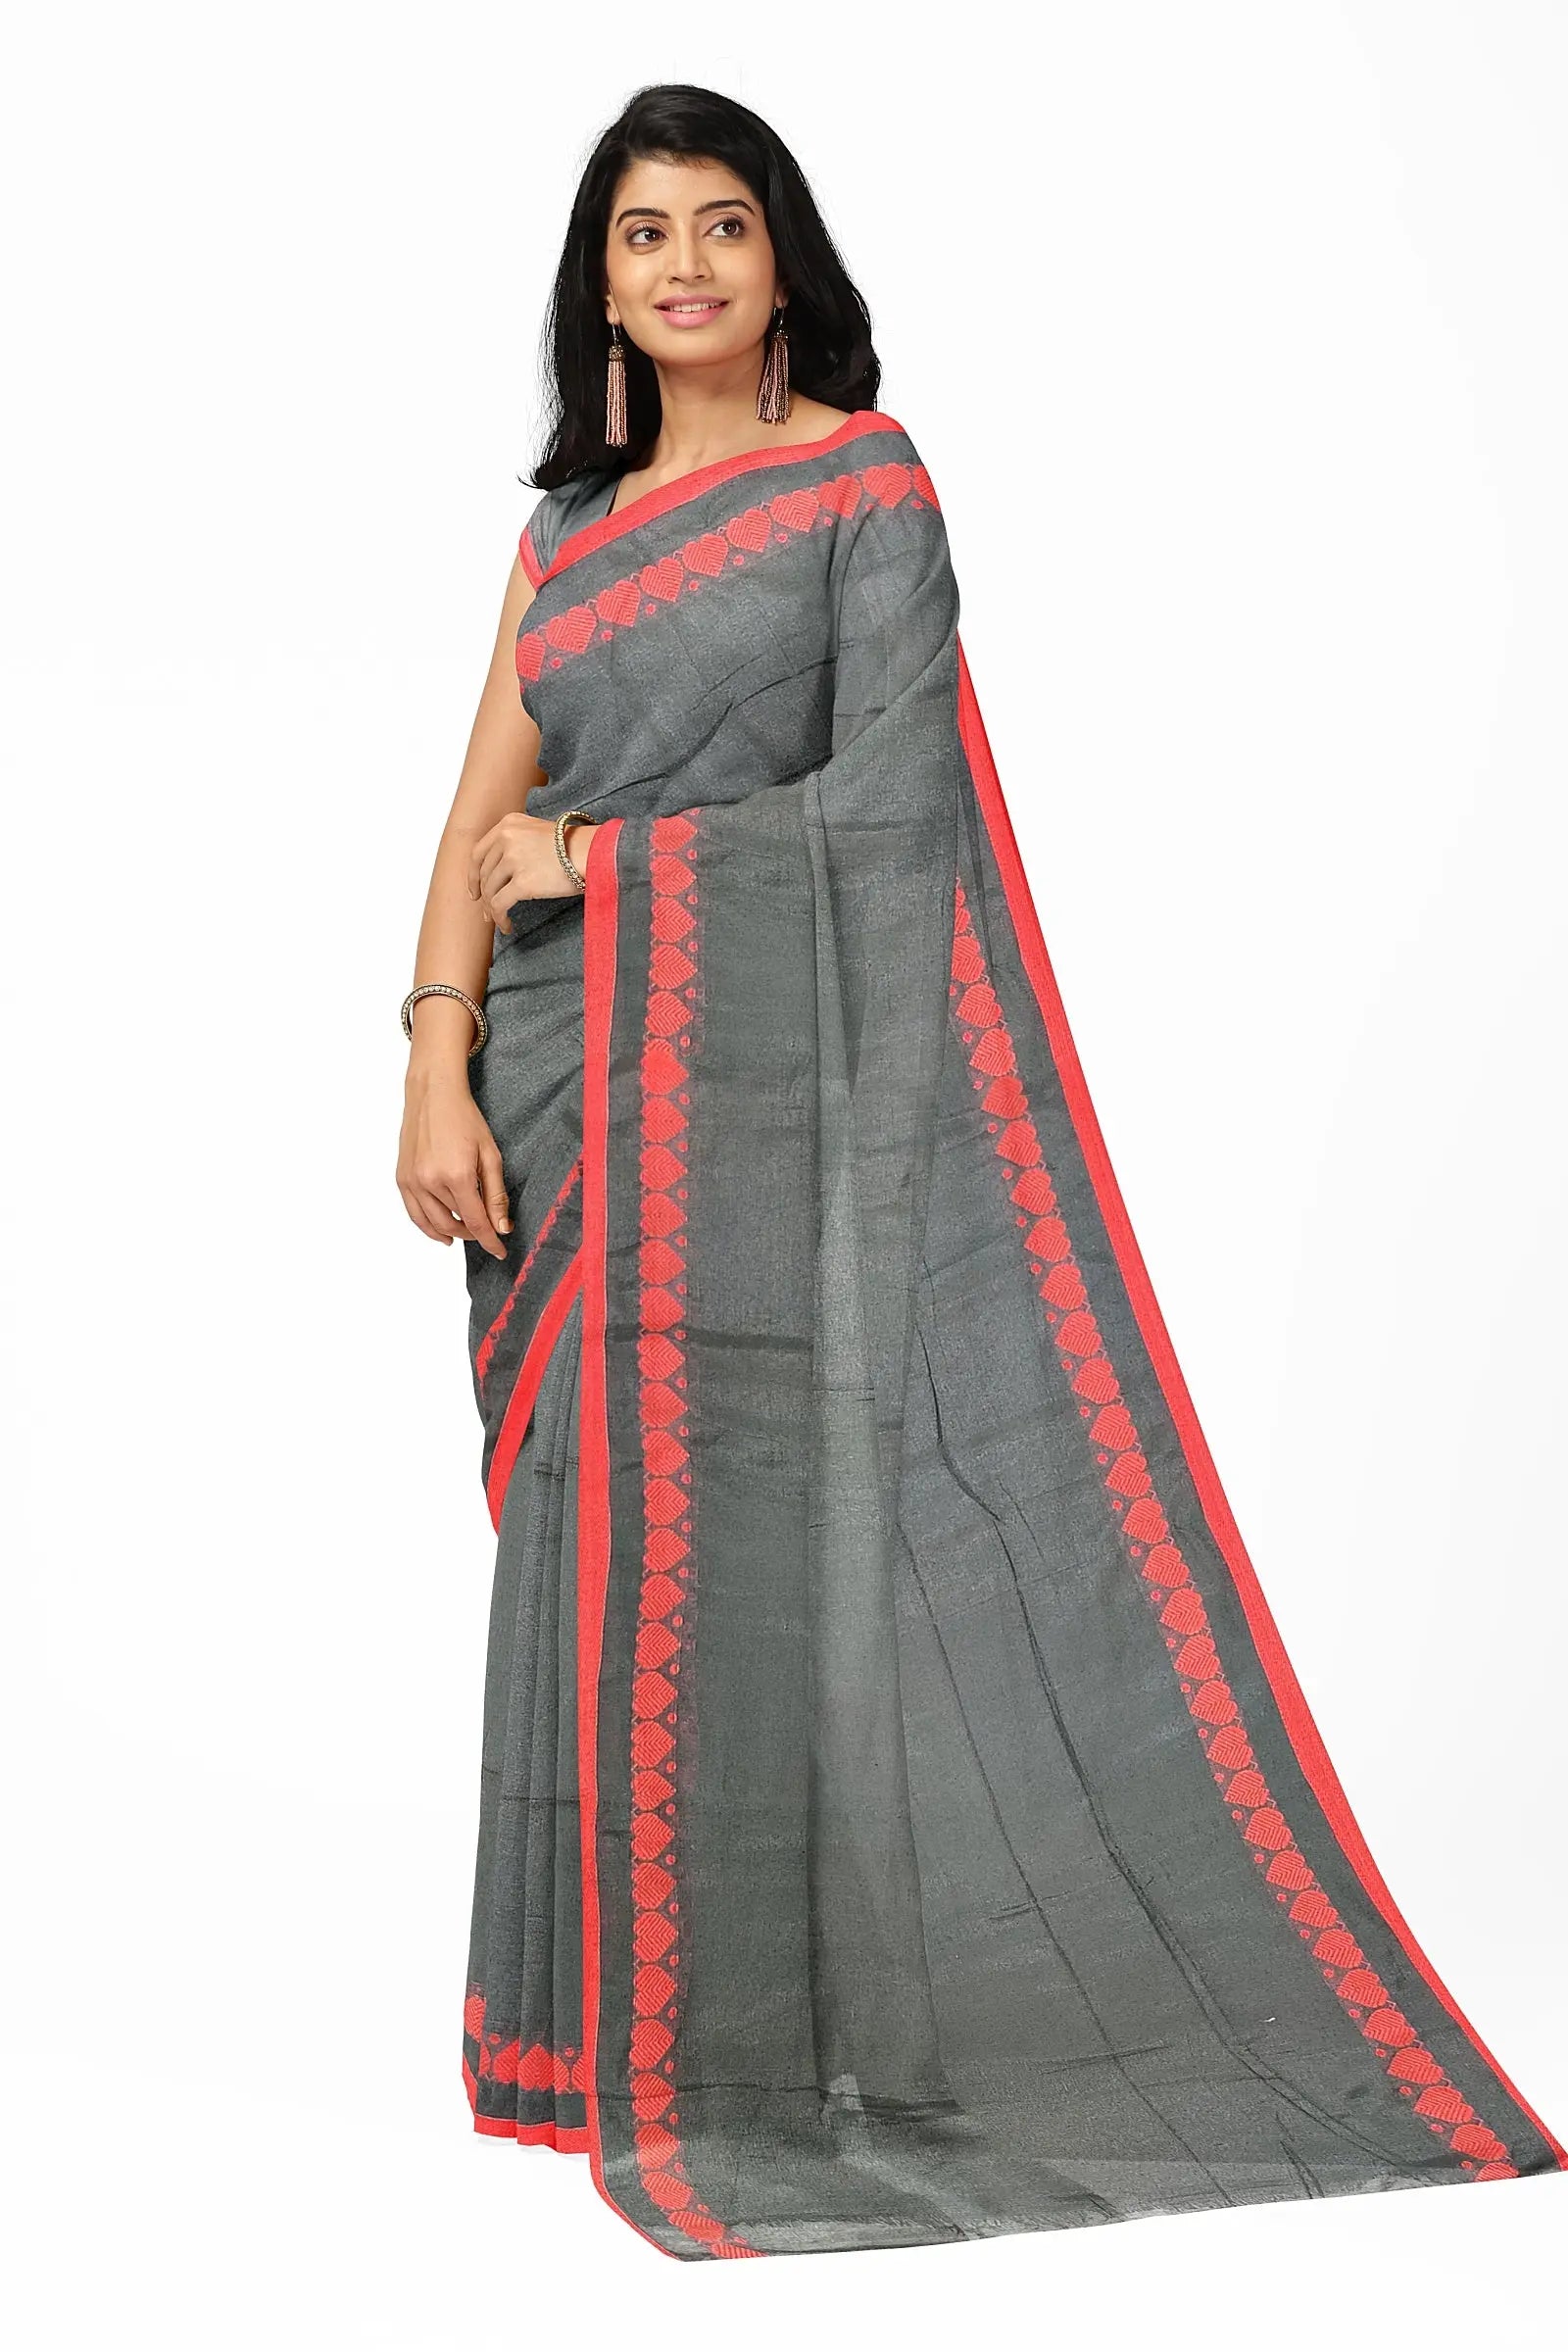 The saree is a beautiful shade of black. The love weaving pattern is made up of small, intricate hearts. The saree is made of 100% cotton. The saree is soft and comfortable to wear. The saree is perfect for a formal or informal event. Putul's fashion